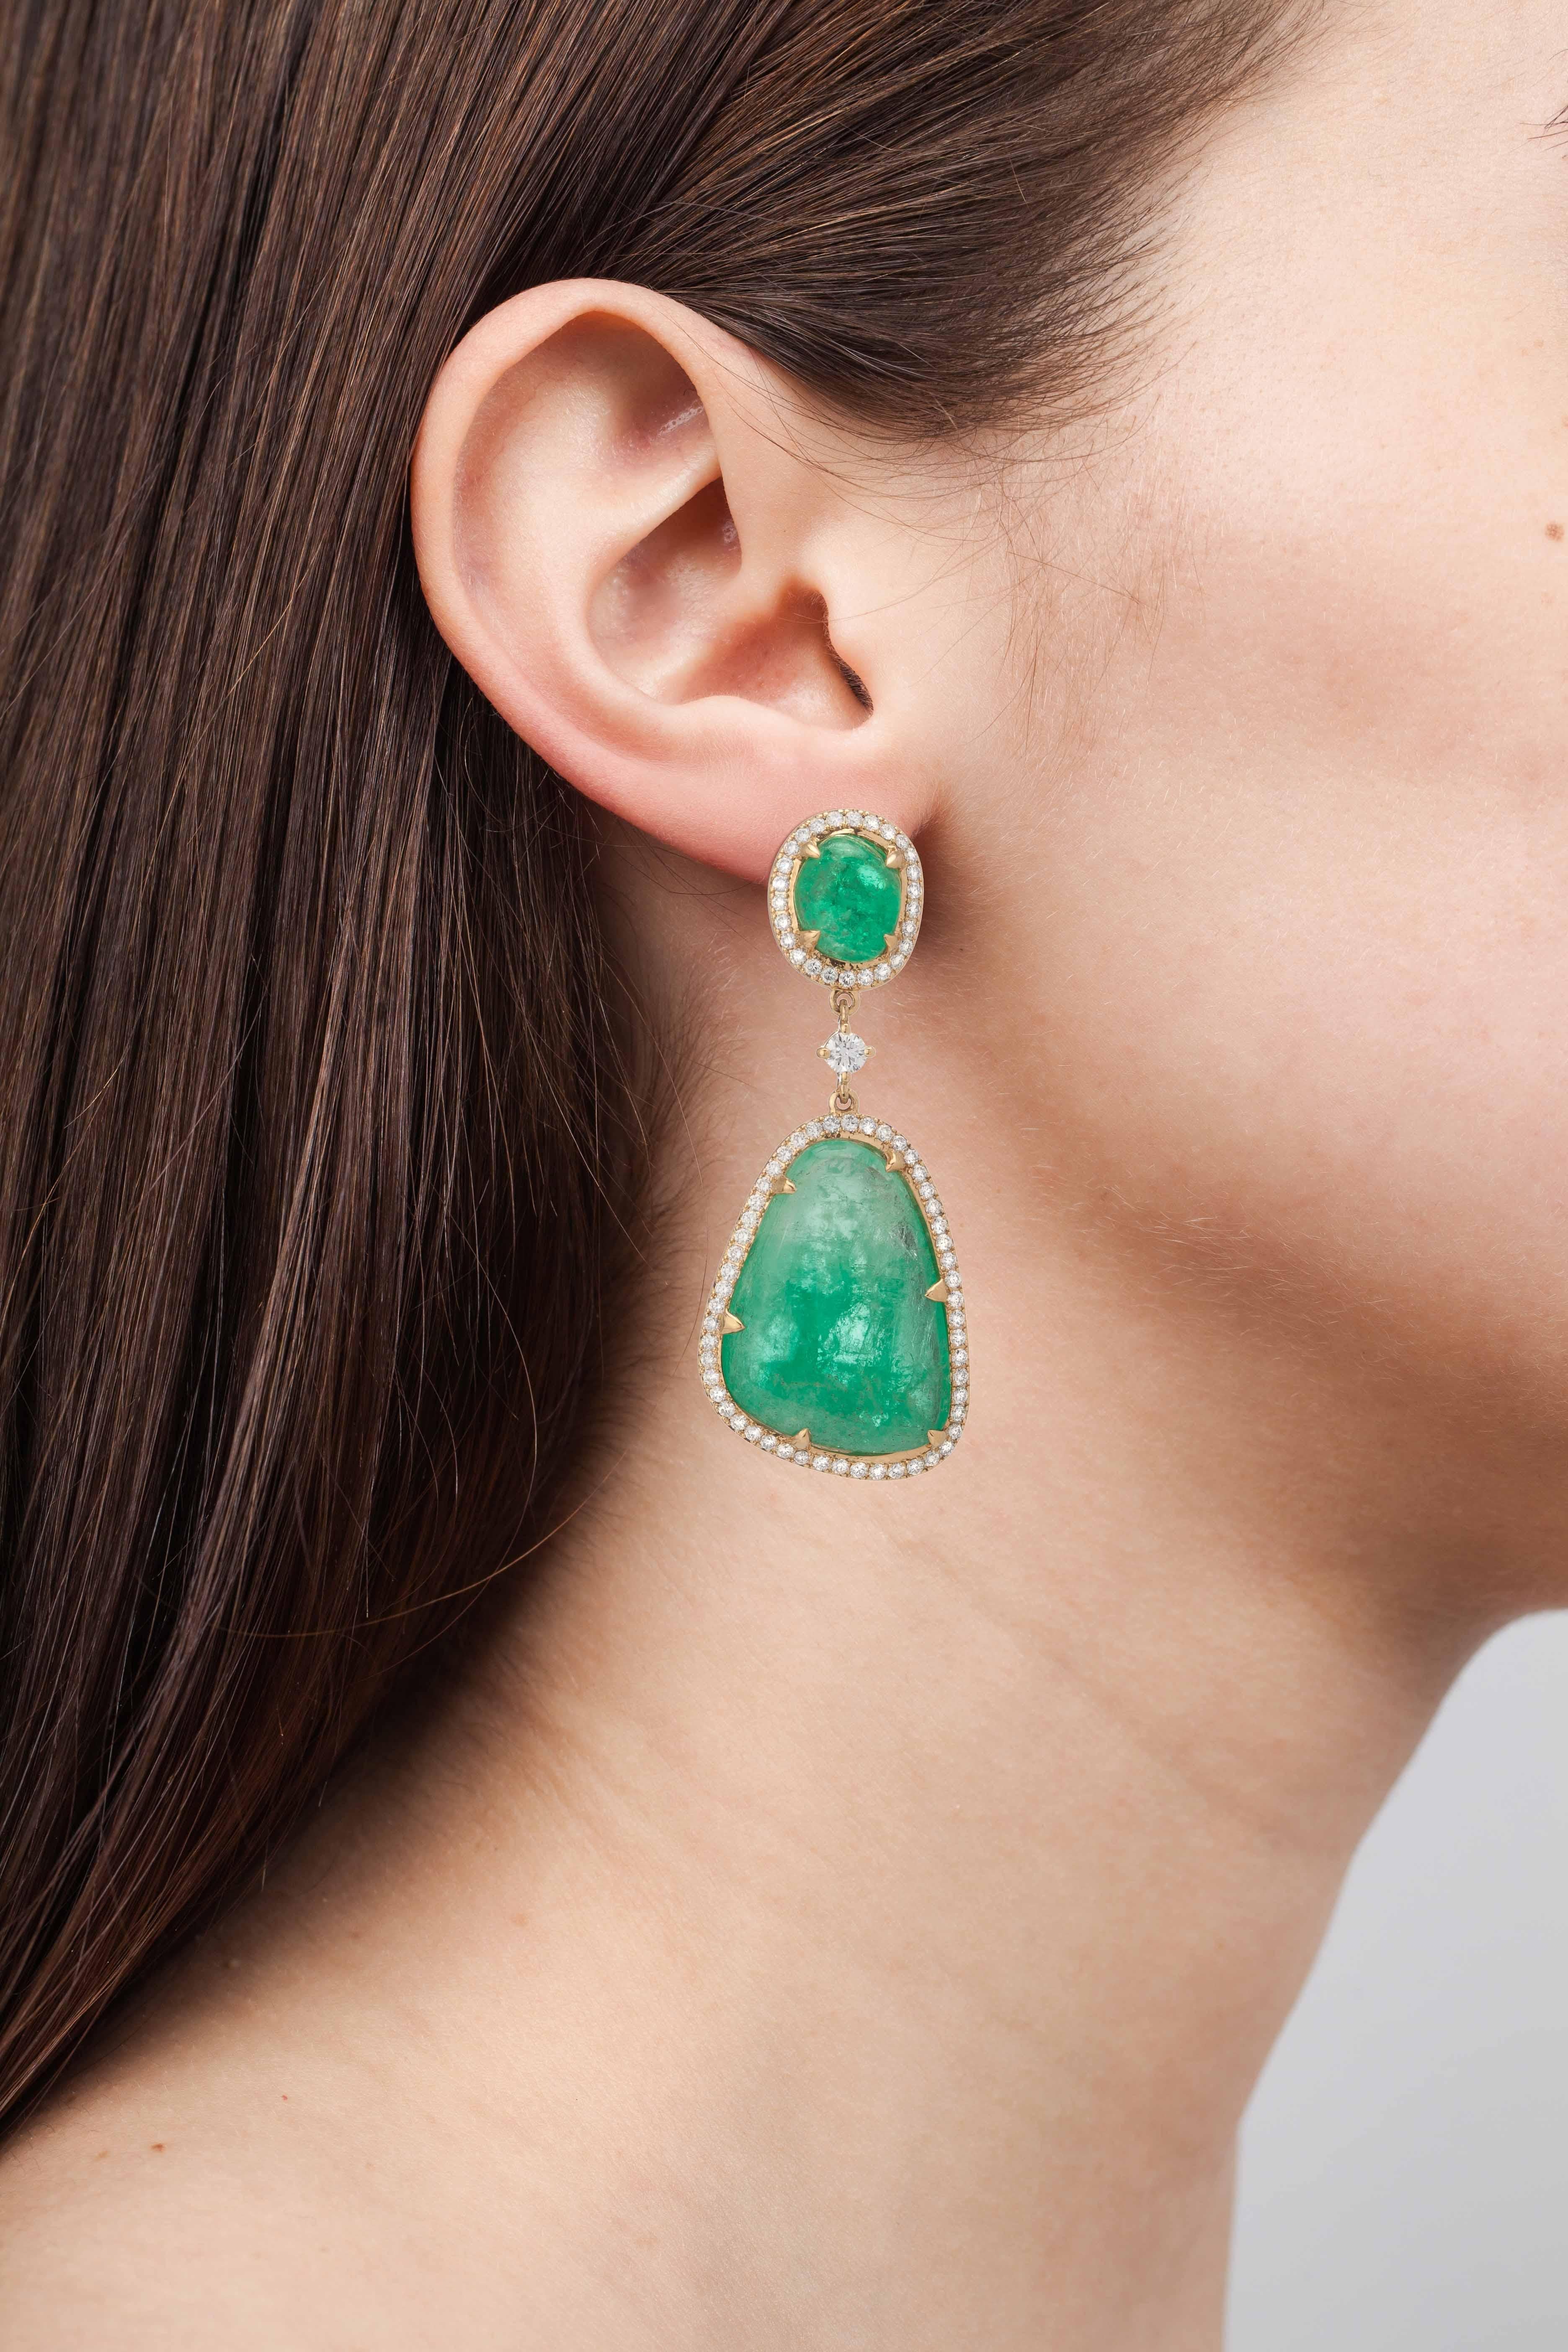 18 Karat yellow gold drop earrings set with Muzo emeralds weighing 50.74 carats and 1.96 carats of diamond halo pave

Muzo Emerald Colombia Heritage Verity Earrings set with 50.74 carats Emerald

Verity is a tribute to the trade between the